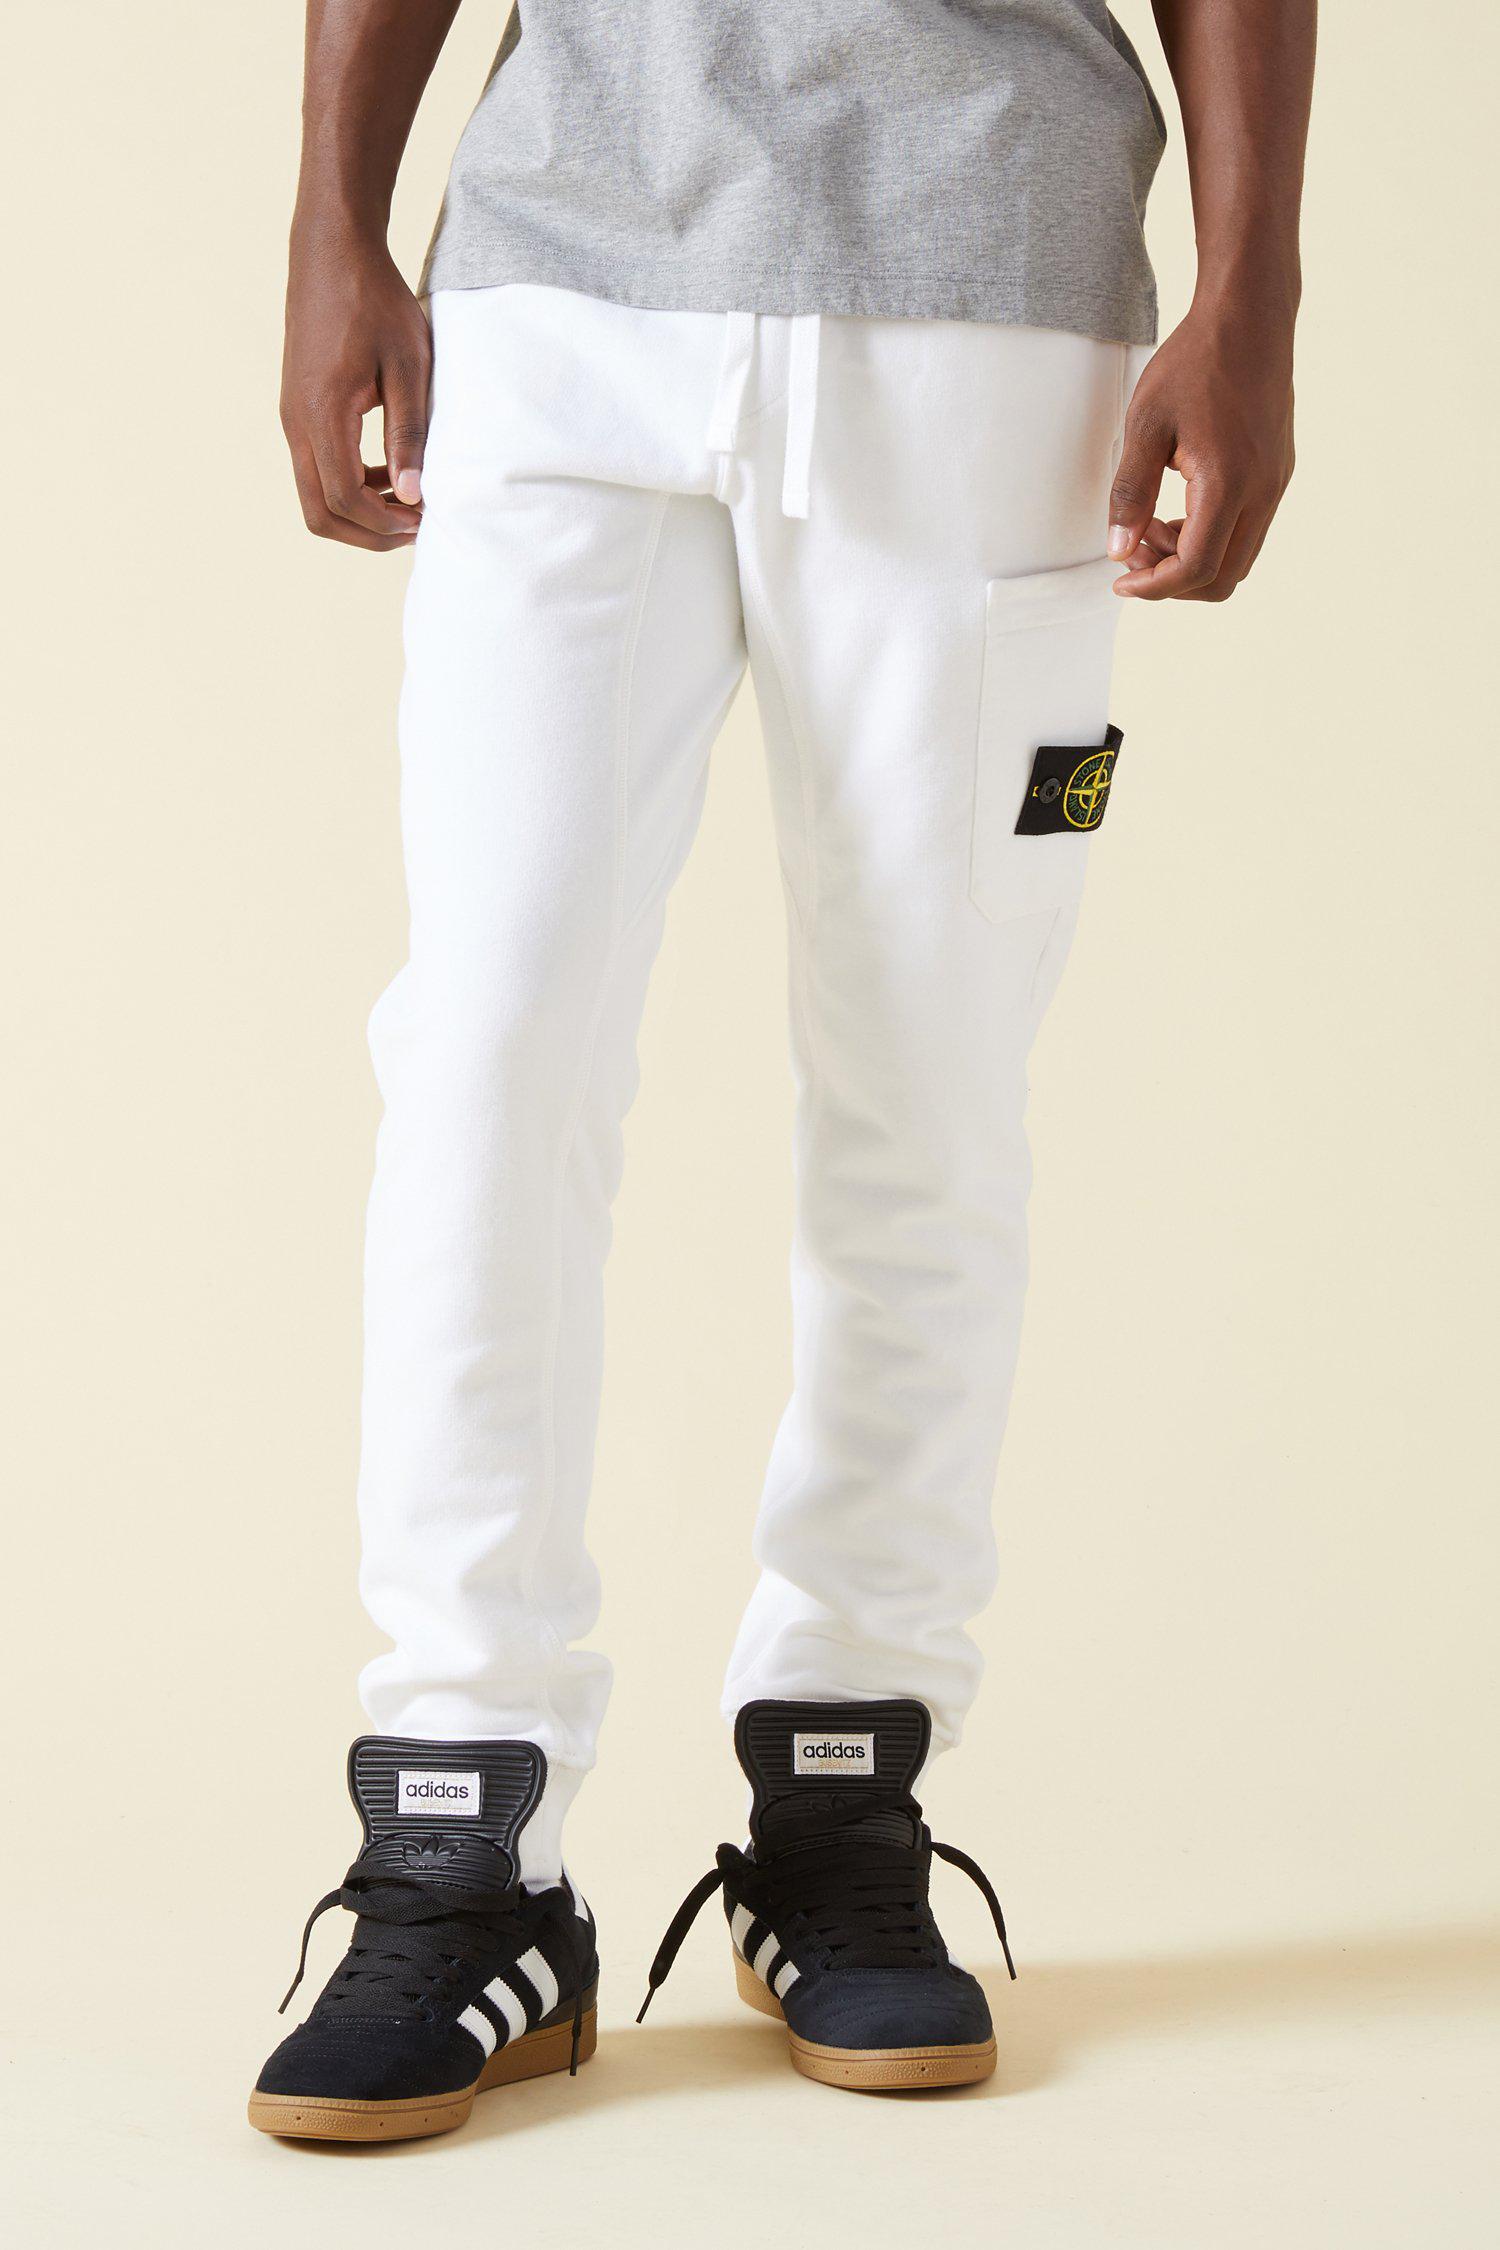 Stone Island 60320 Brushed Cotton Fleece Sweatpants in White for Men - Lyst